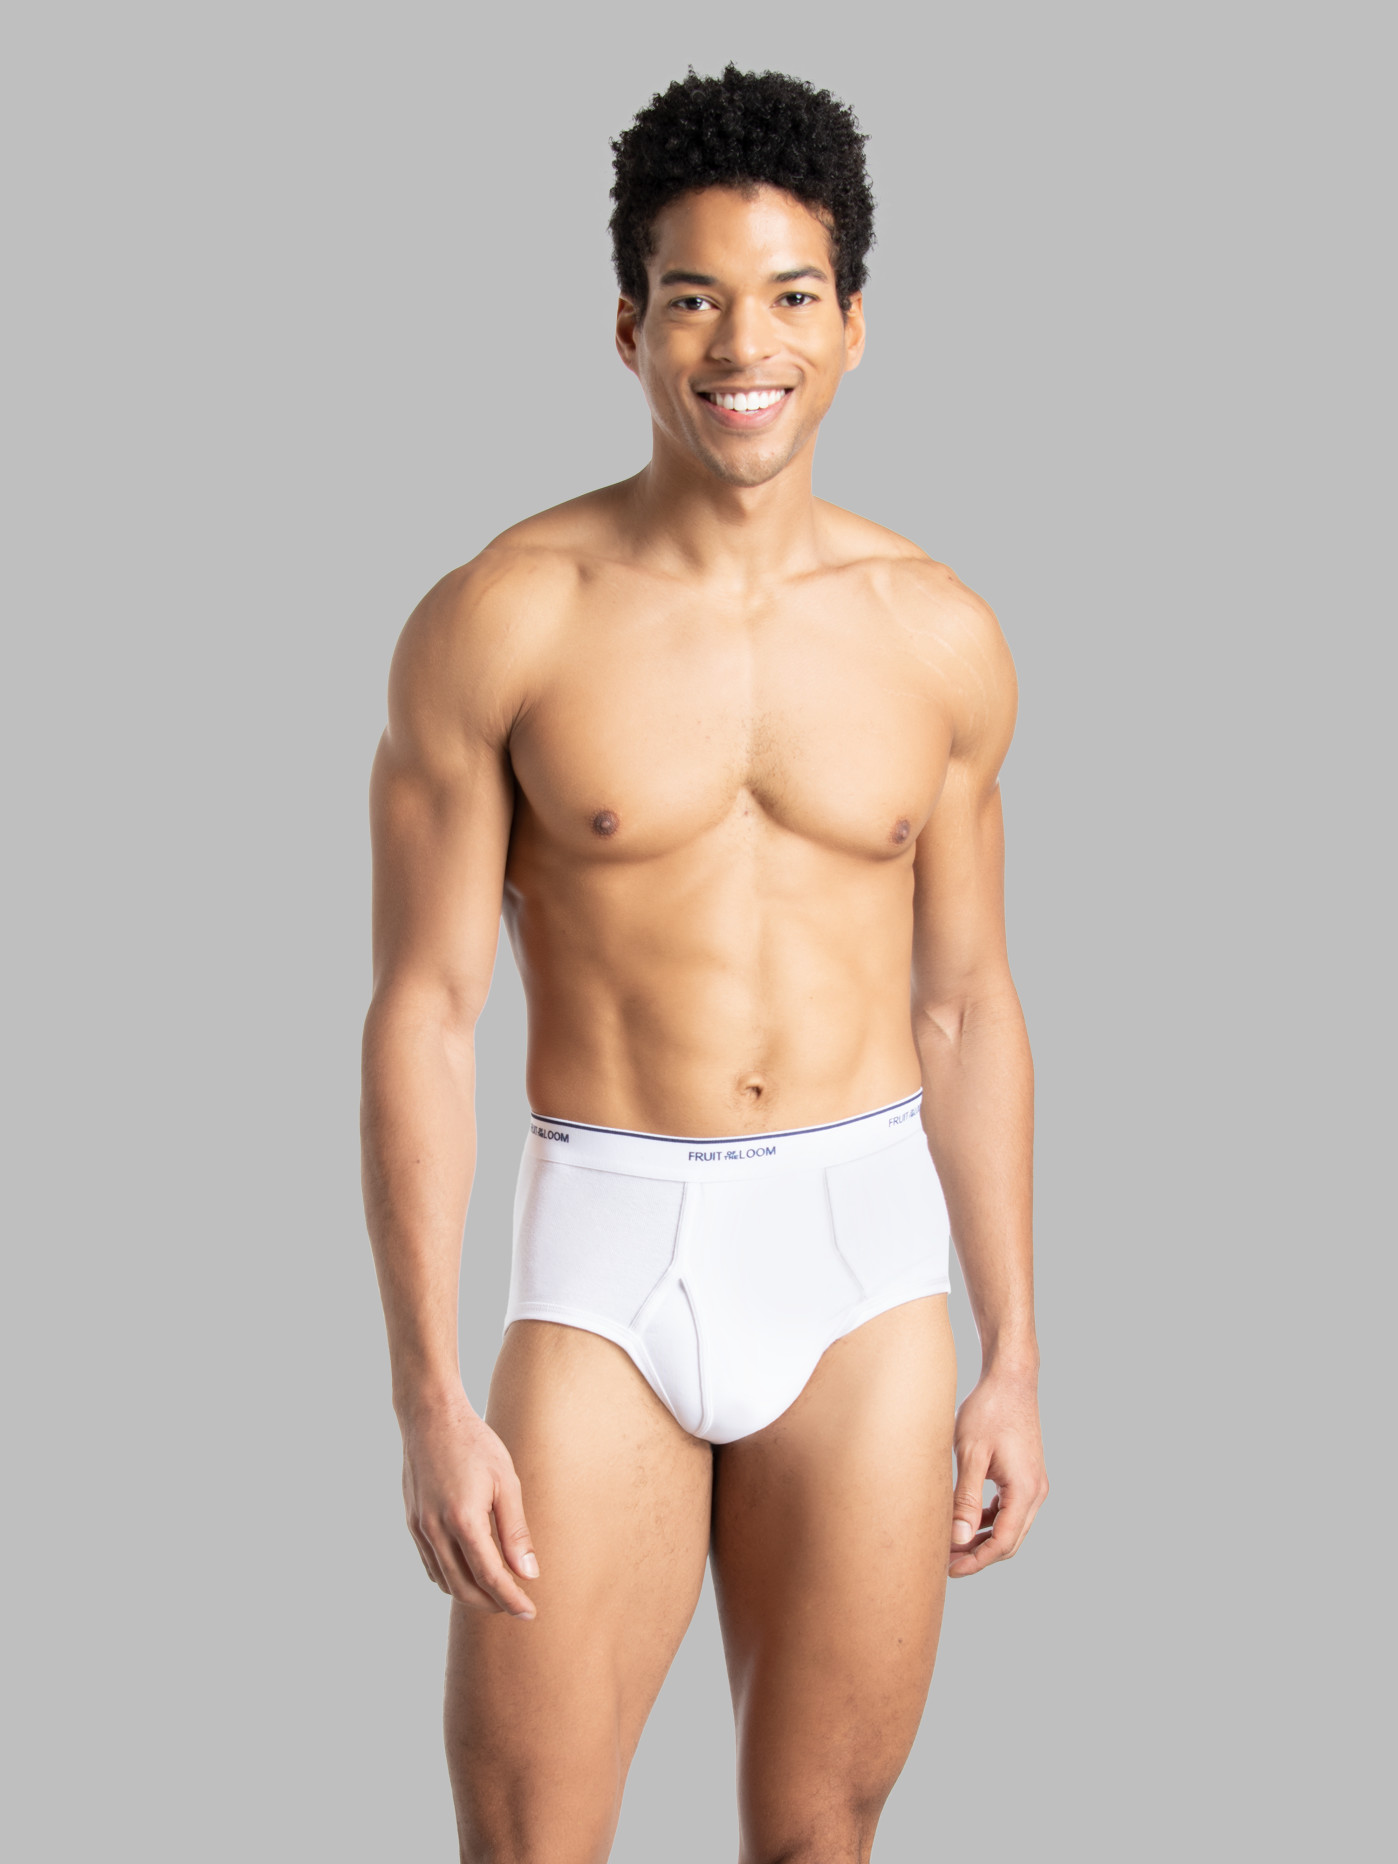 Fruit of the Loom Men's Boxer Briefs 6-Pack Sizes XL, 3X (3X 48-50